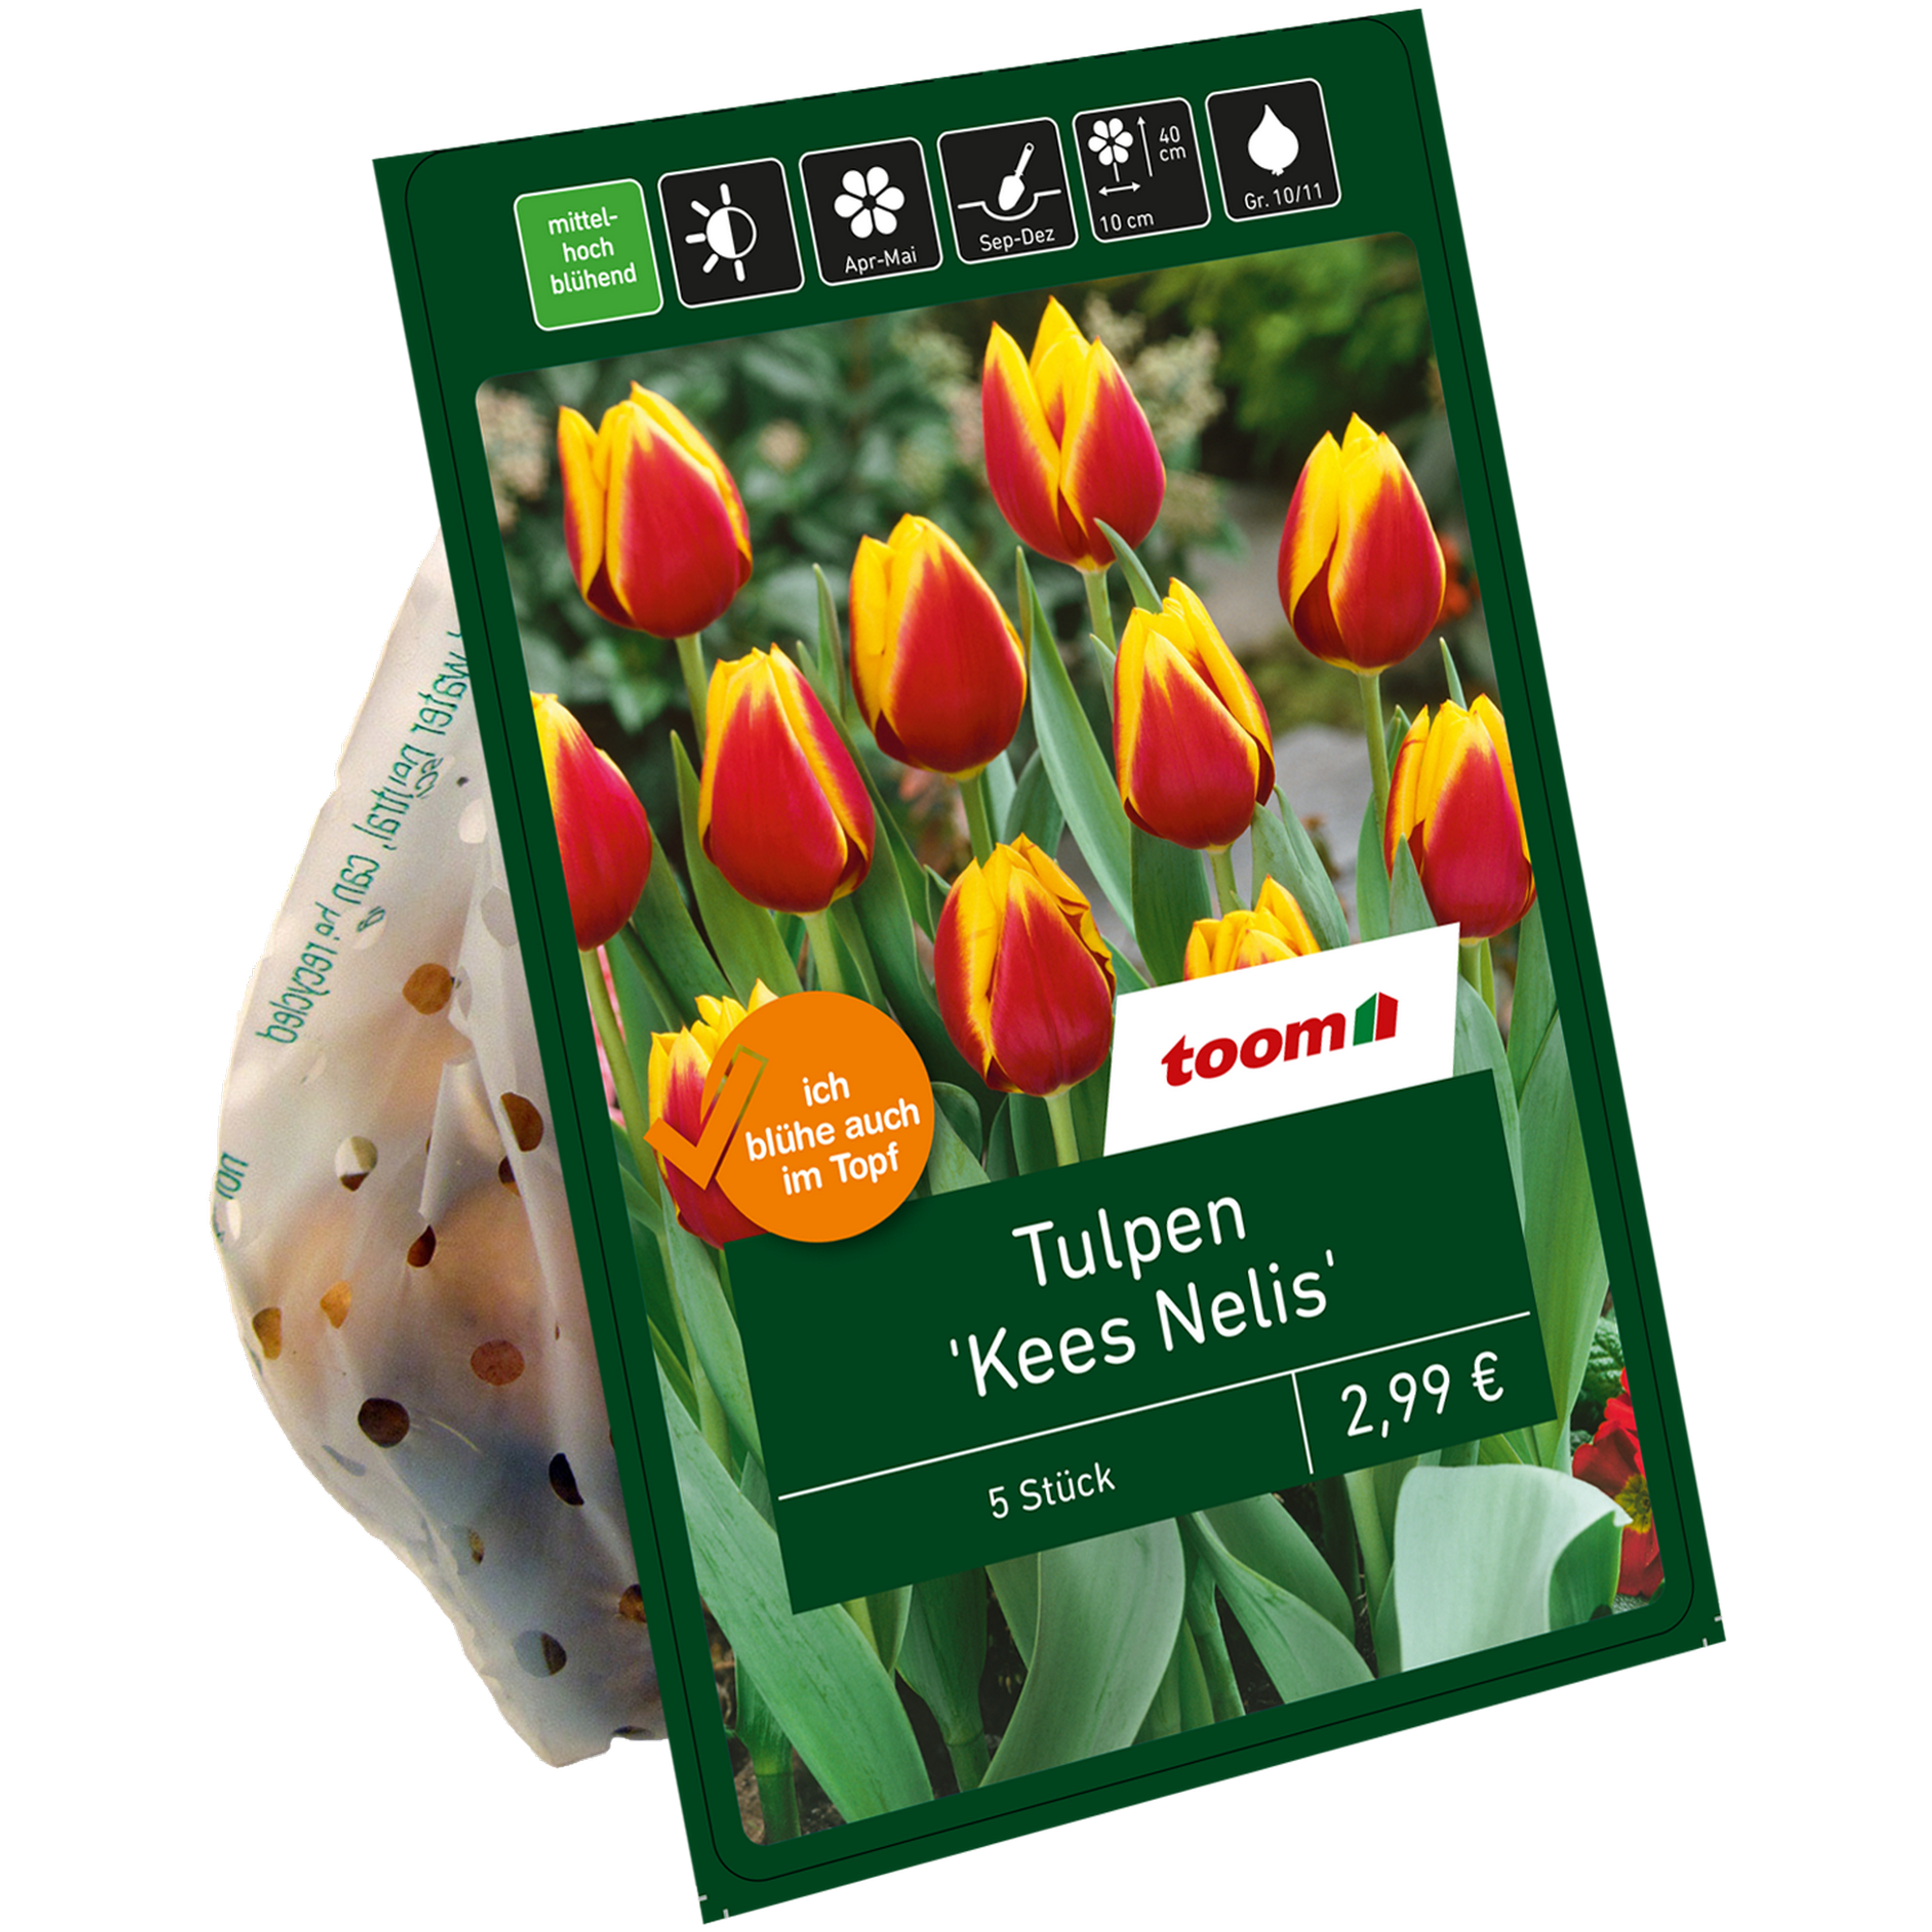 Tulpen 'Kees Nelis' rot-gelb 10 Zwiebeln + product picture